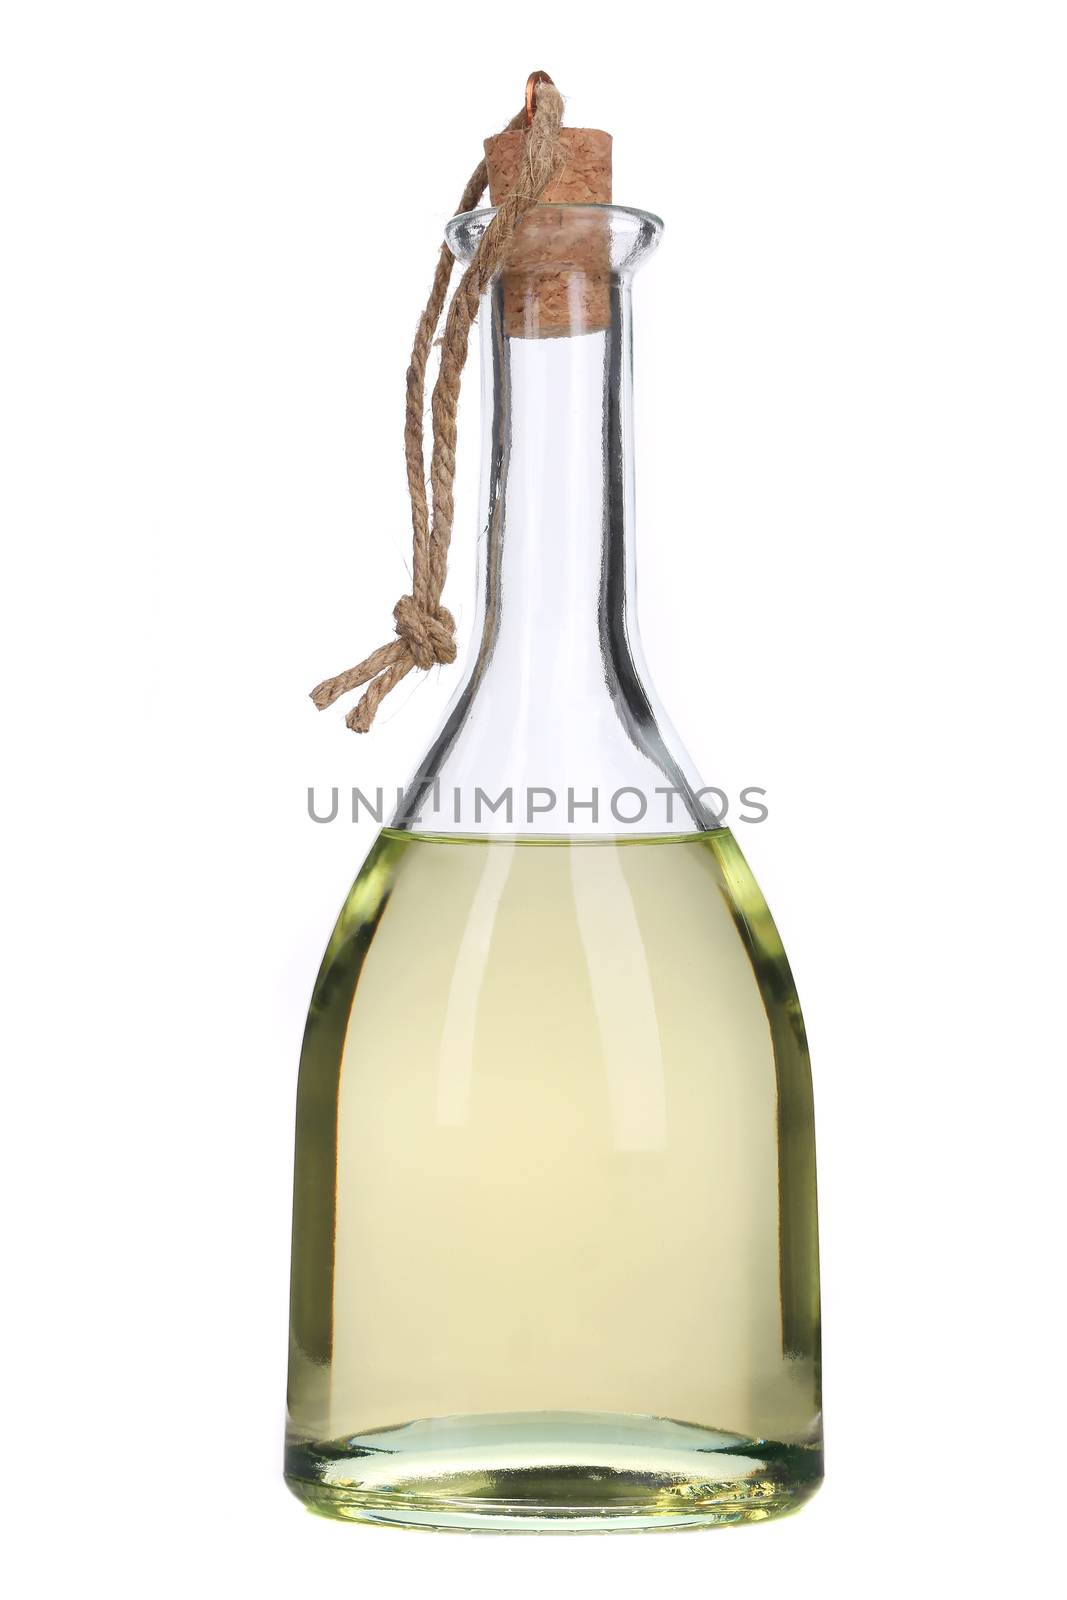 Small bottle of olive oil with cork stopper. Isolated on a white background.